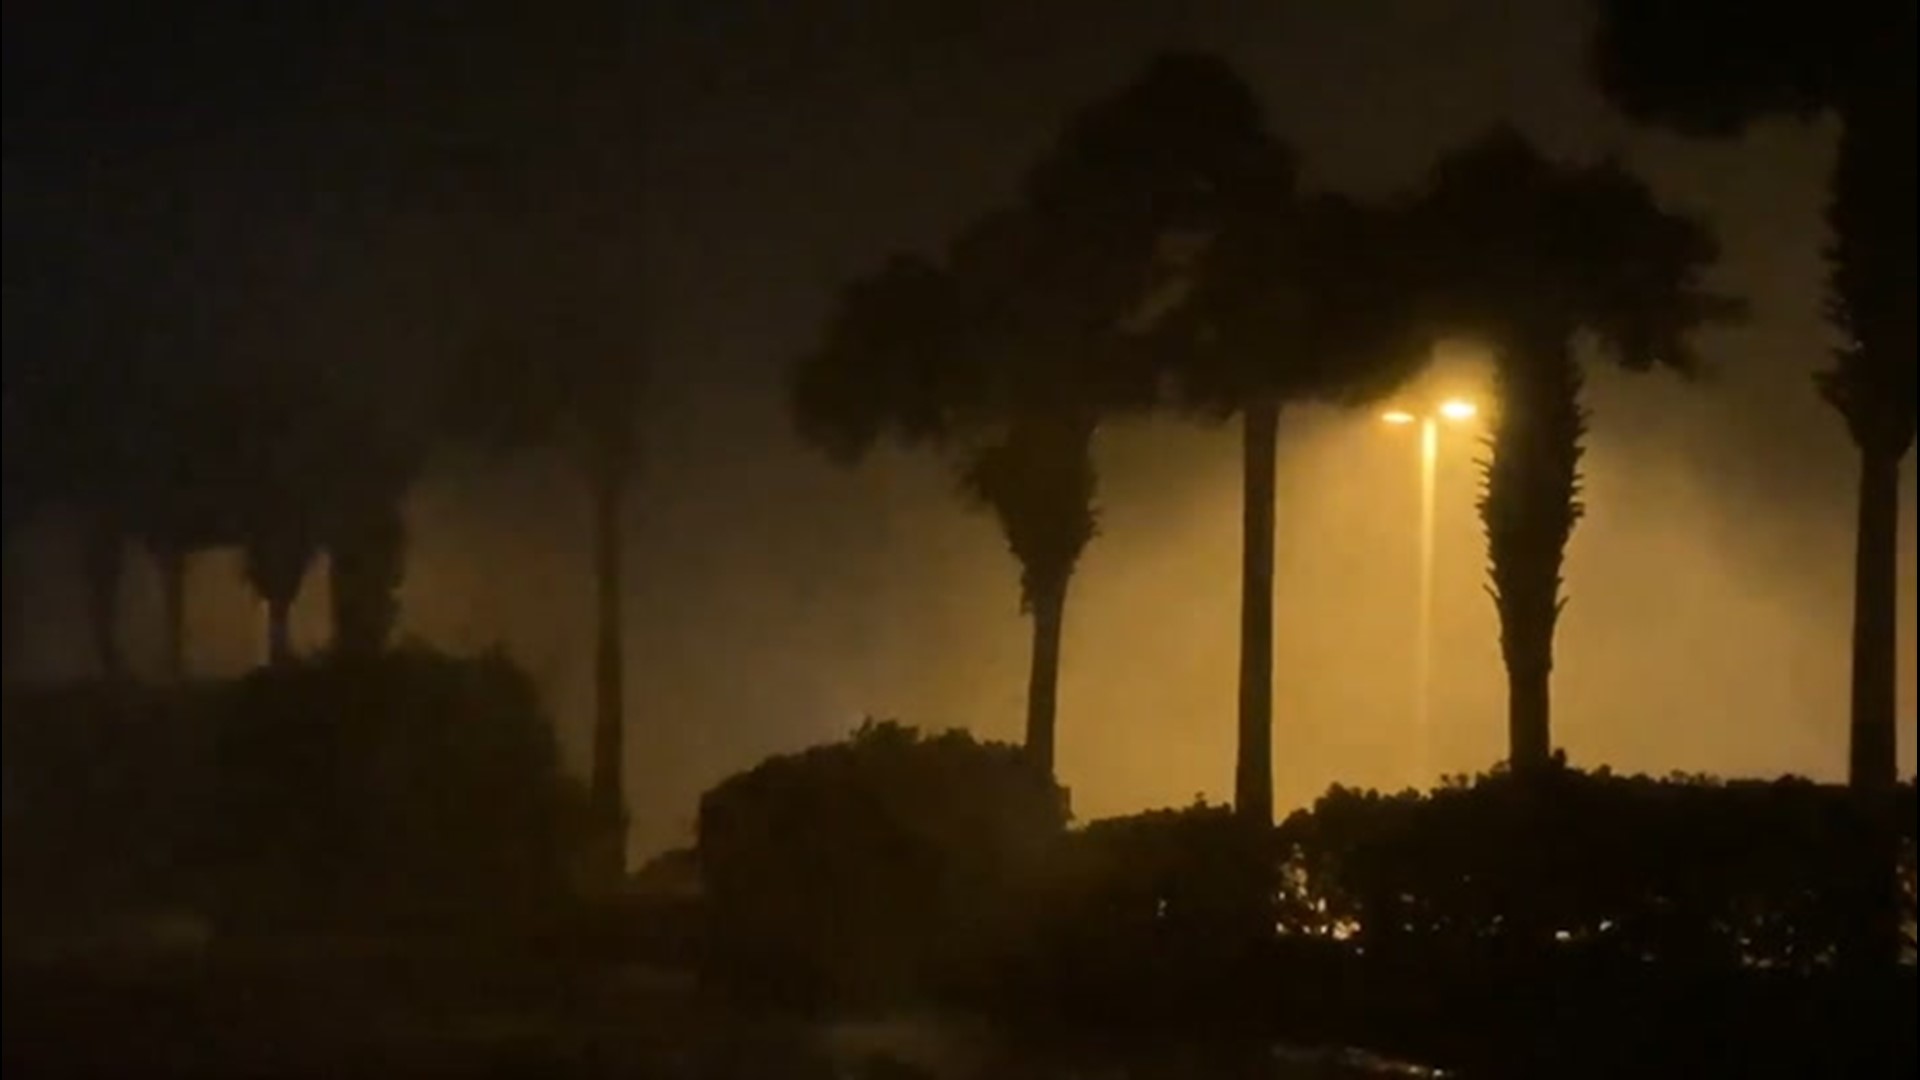 Hurricane Sally's powerful winds ripped through Gulf Shores, Alabama, on Sept. 16, as the storm inched closer and closer to the coast. The storms maximum sustained winds were reportedly as strong as 105 mph.